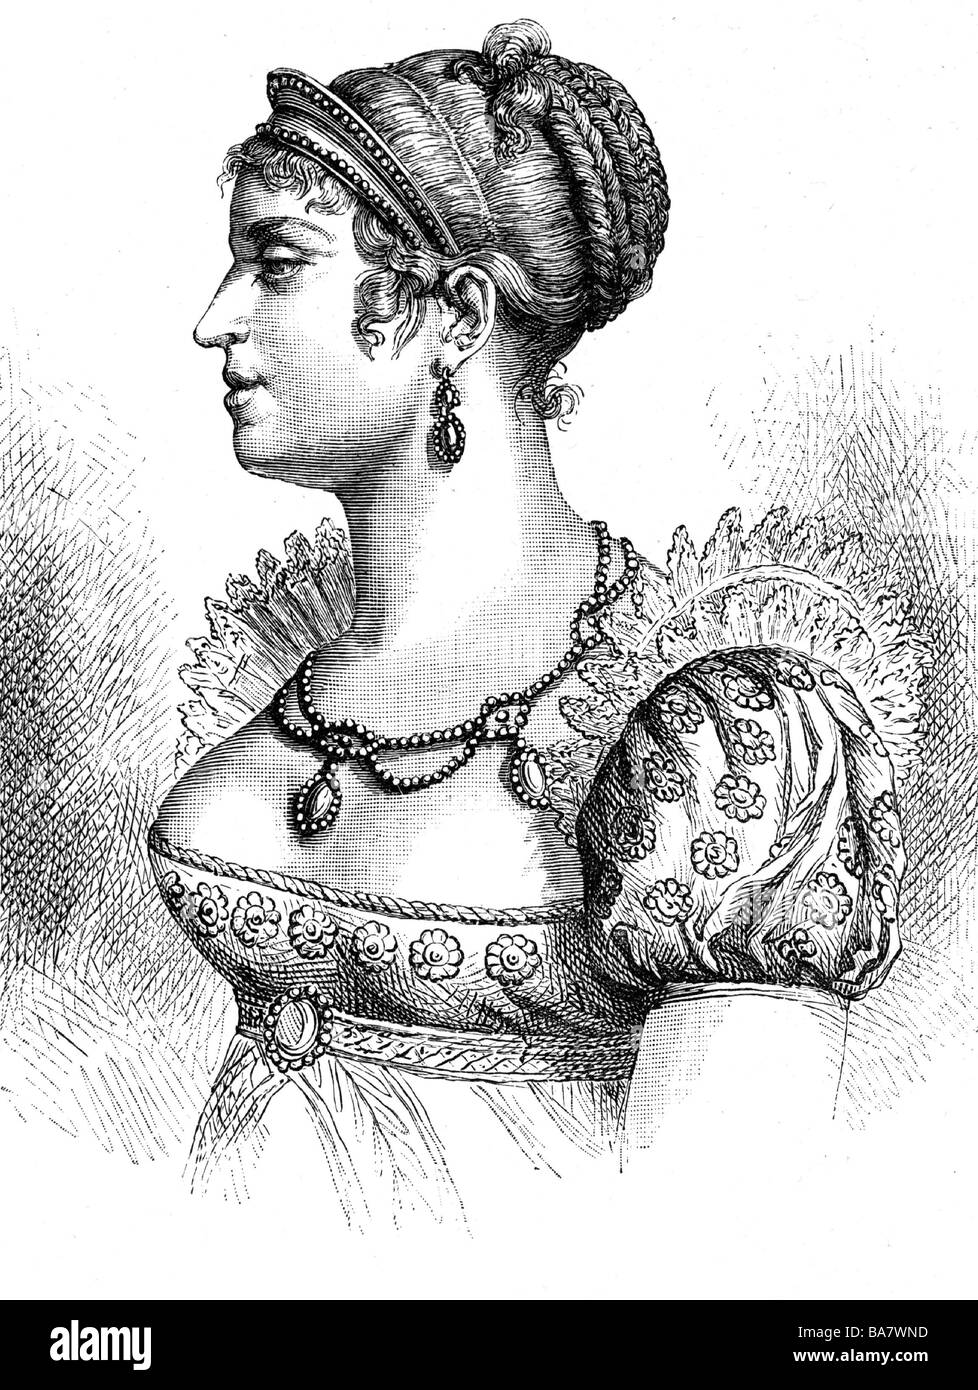 Marie Louise, 12.12.1791 - 12.12.1847, Empress Consort of France 2.4.1810 - 6.4.1814, portrait, wood engraving, mid 19th century,  , Stock Photo